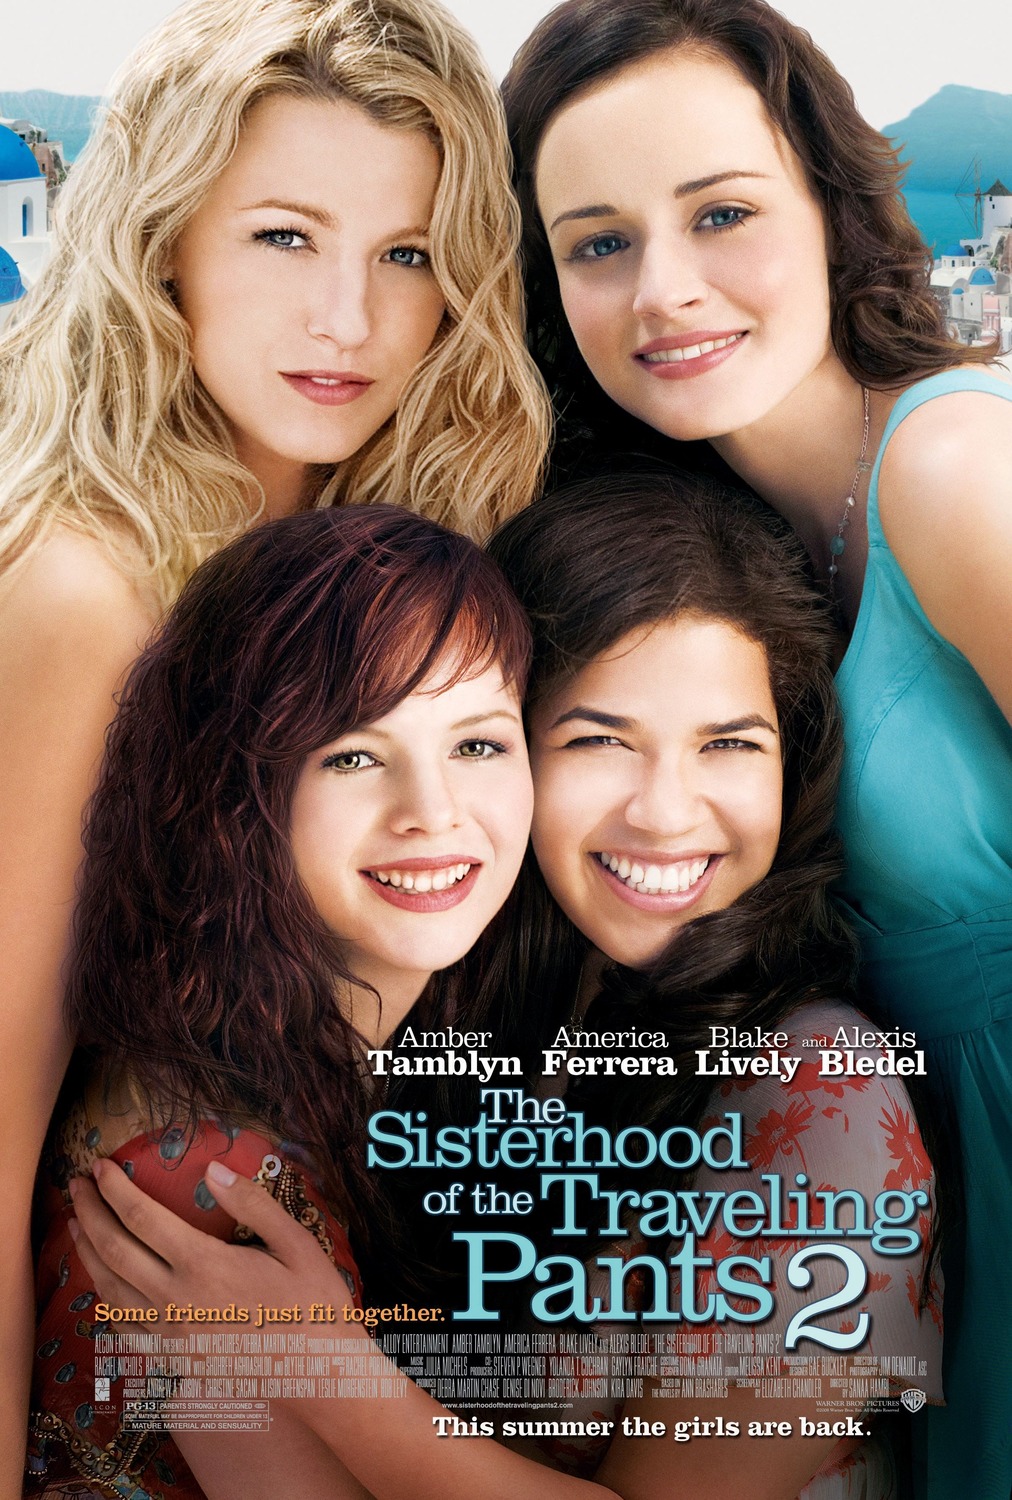 Extra Large Movie Poster Image for The Sisterhood of the Traveling Pants 2 